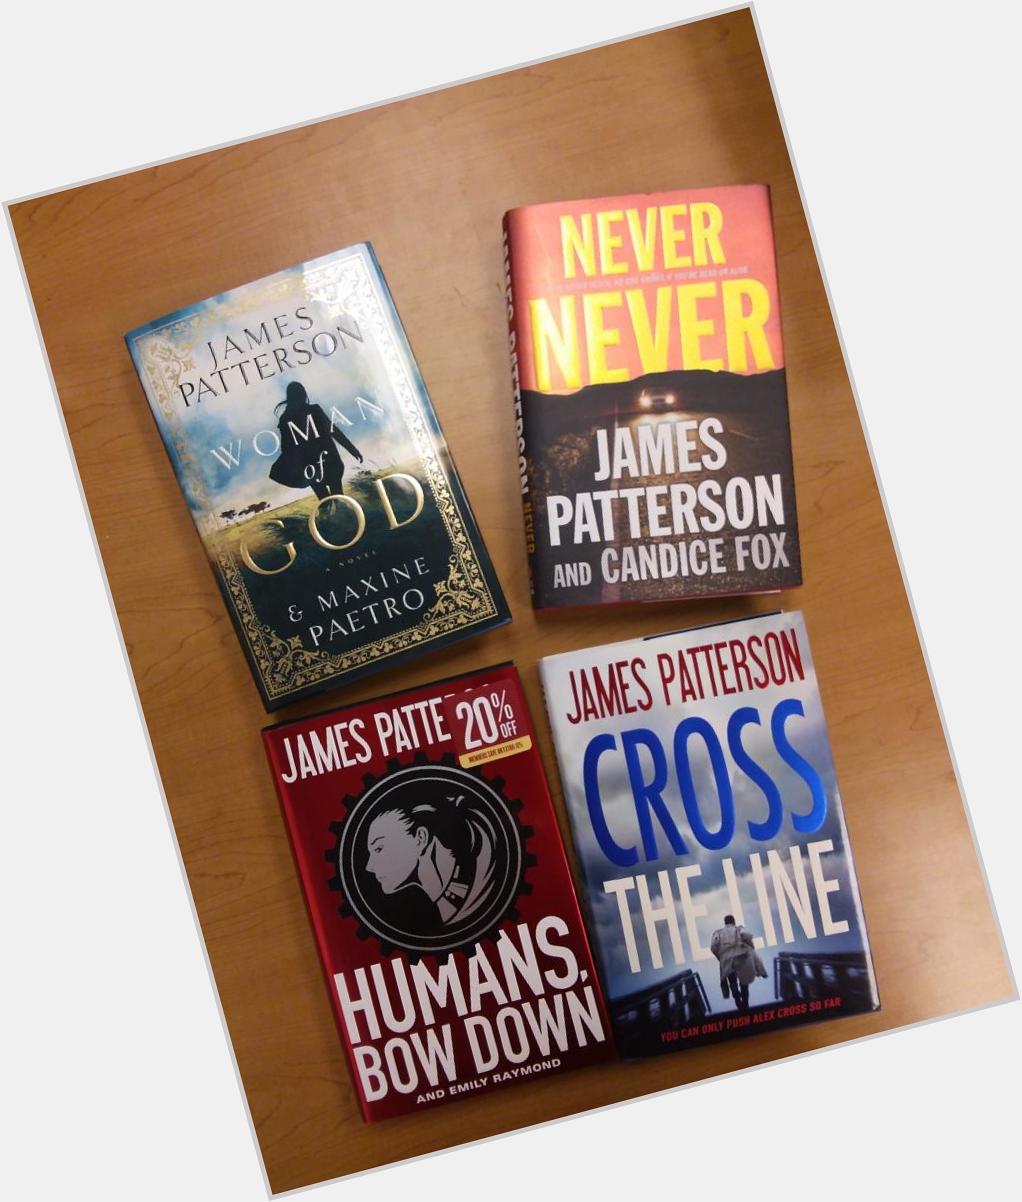 Happy Birthday James Patterson! What\s your favorite JP book?  